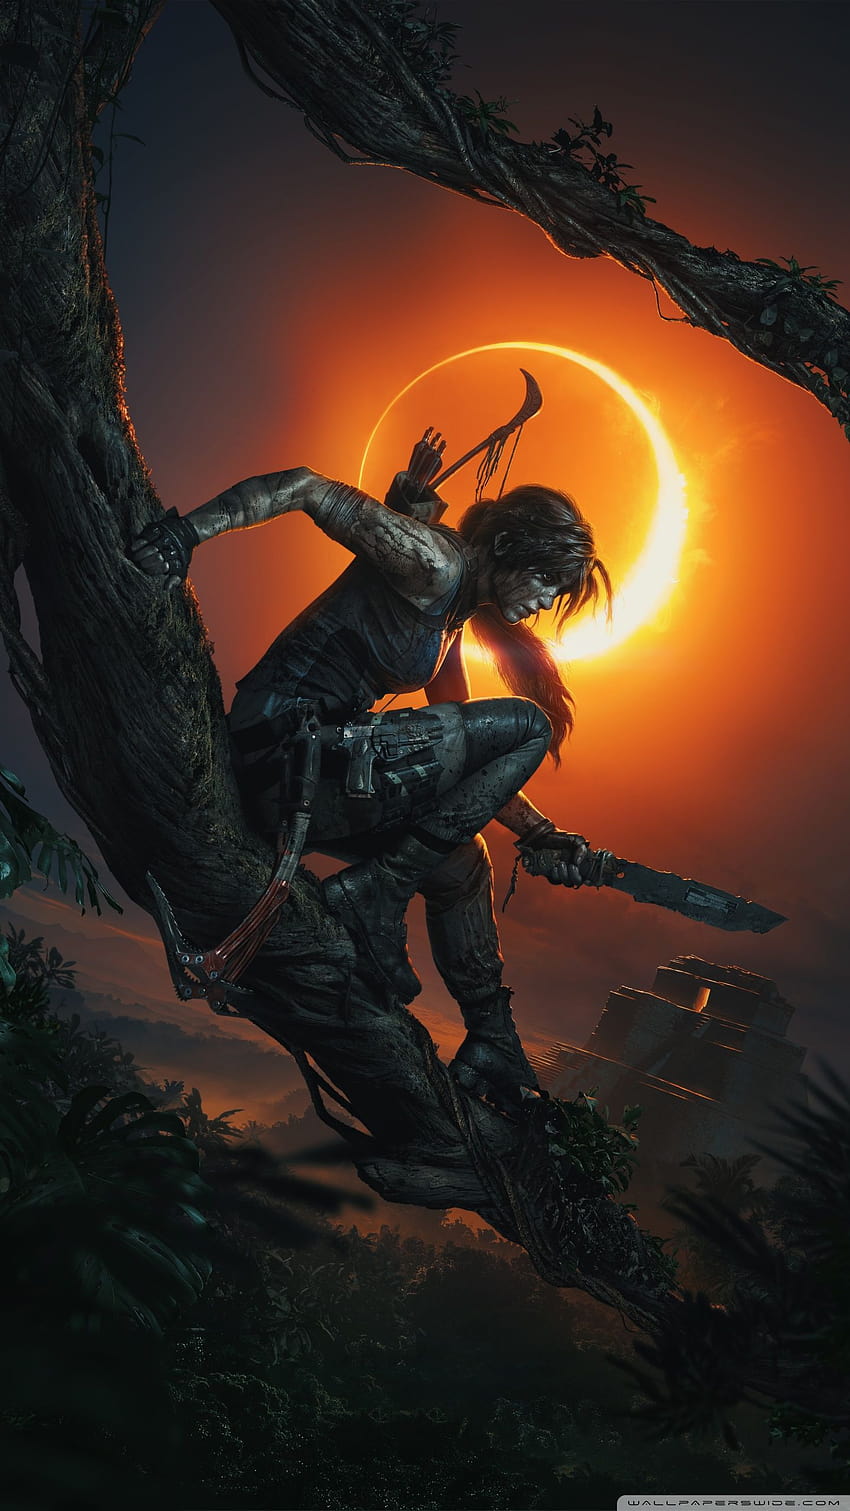 Shadow of the Tomb Raider 2018 Puzzle Video Game Ultra Backgrounds for & Triple : タブレット : スマートフォン、スマートフォン用ゲーム HD電話の壁紙